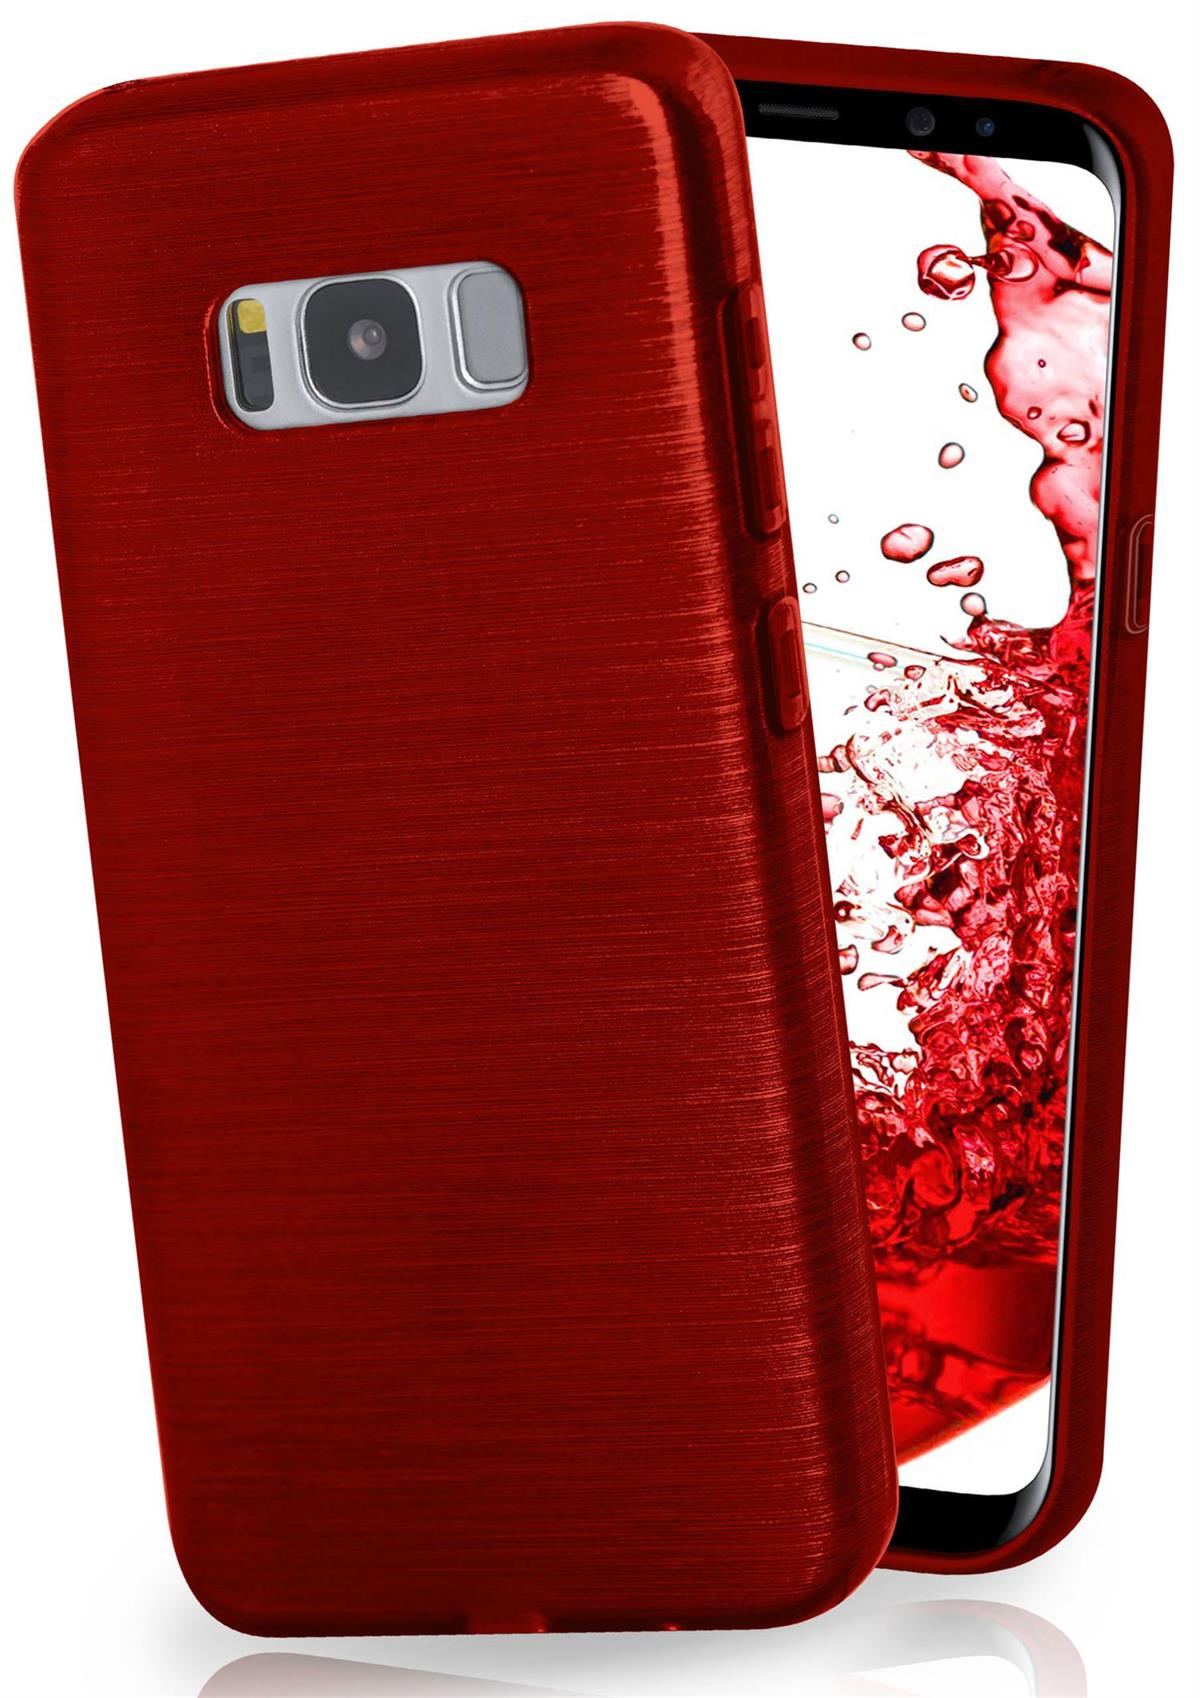 Galaxy Plus, S8 Brushed Case, Backcover, Crimson-Red MOEX Samsung,